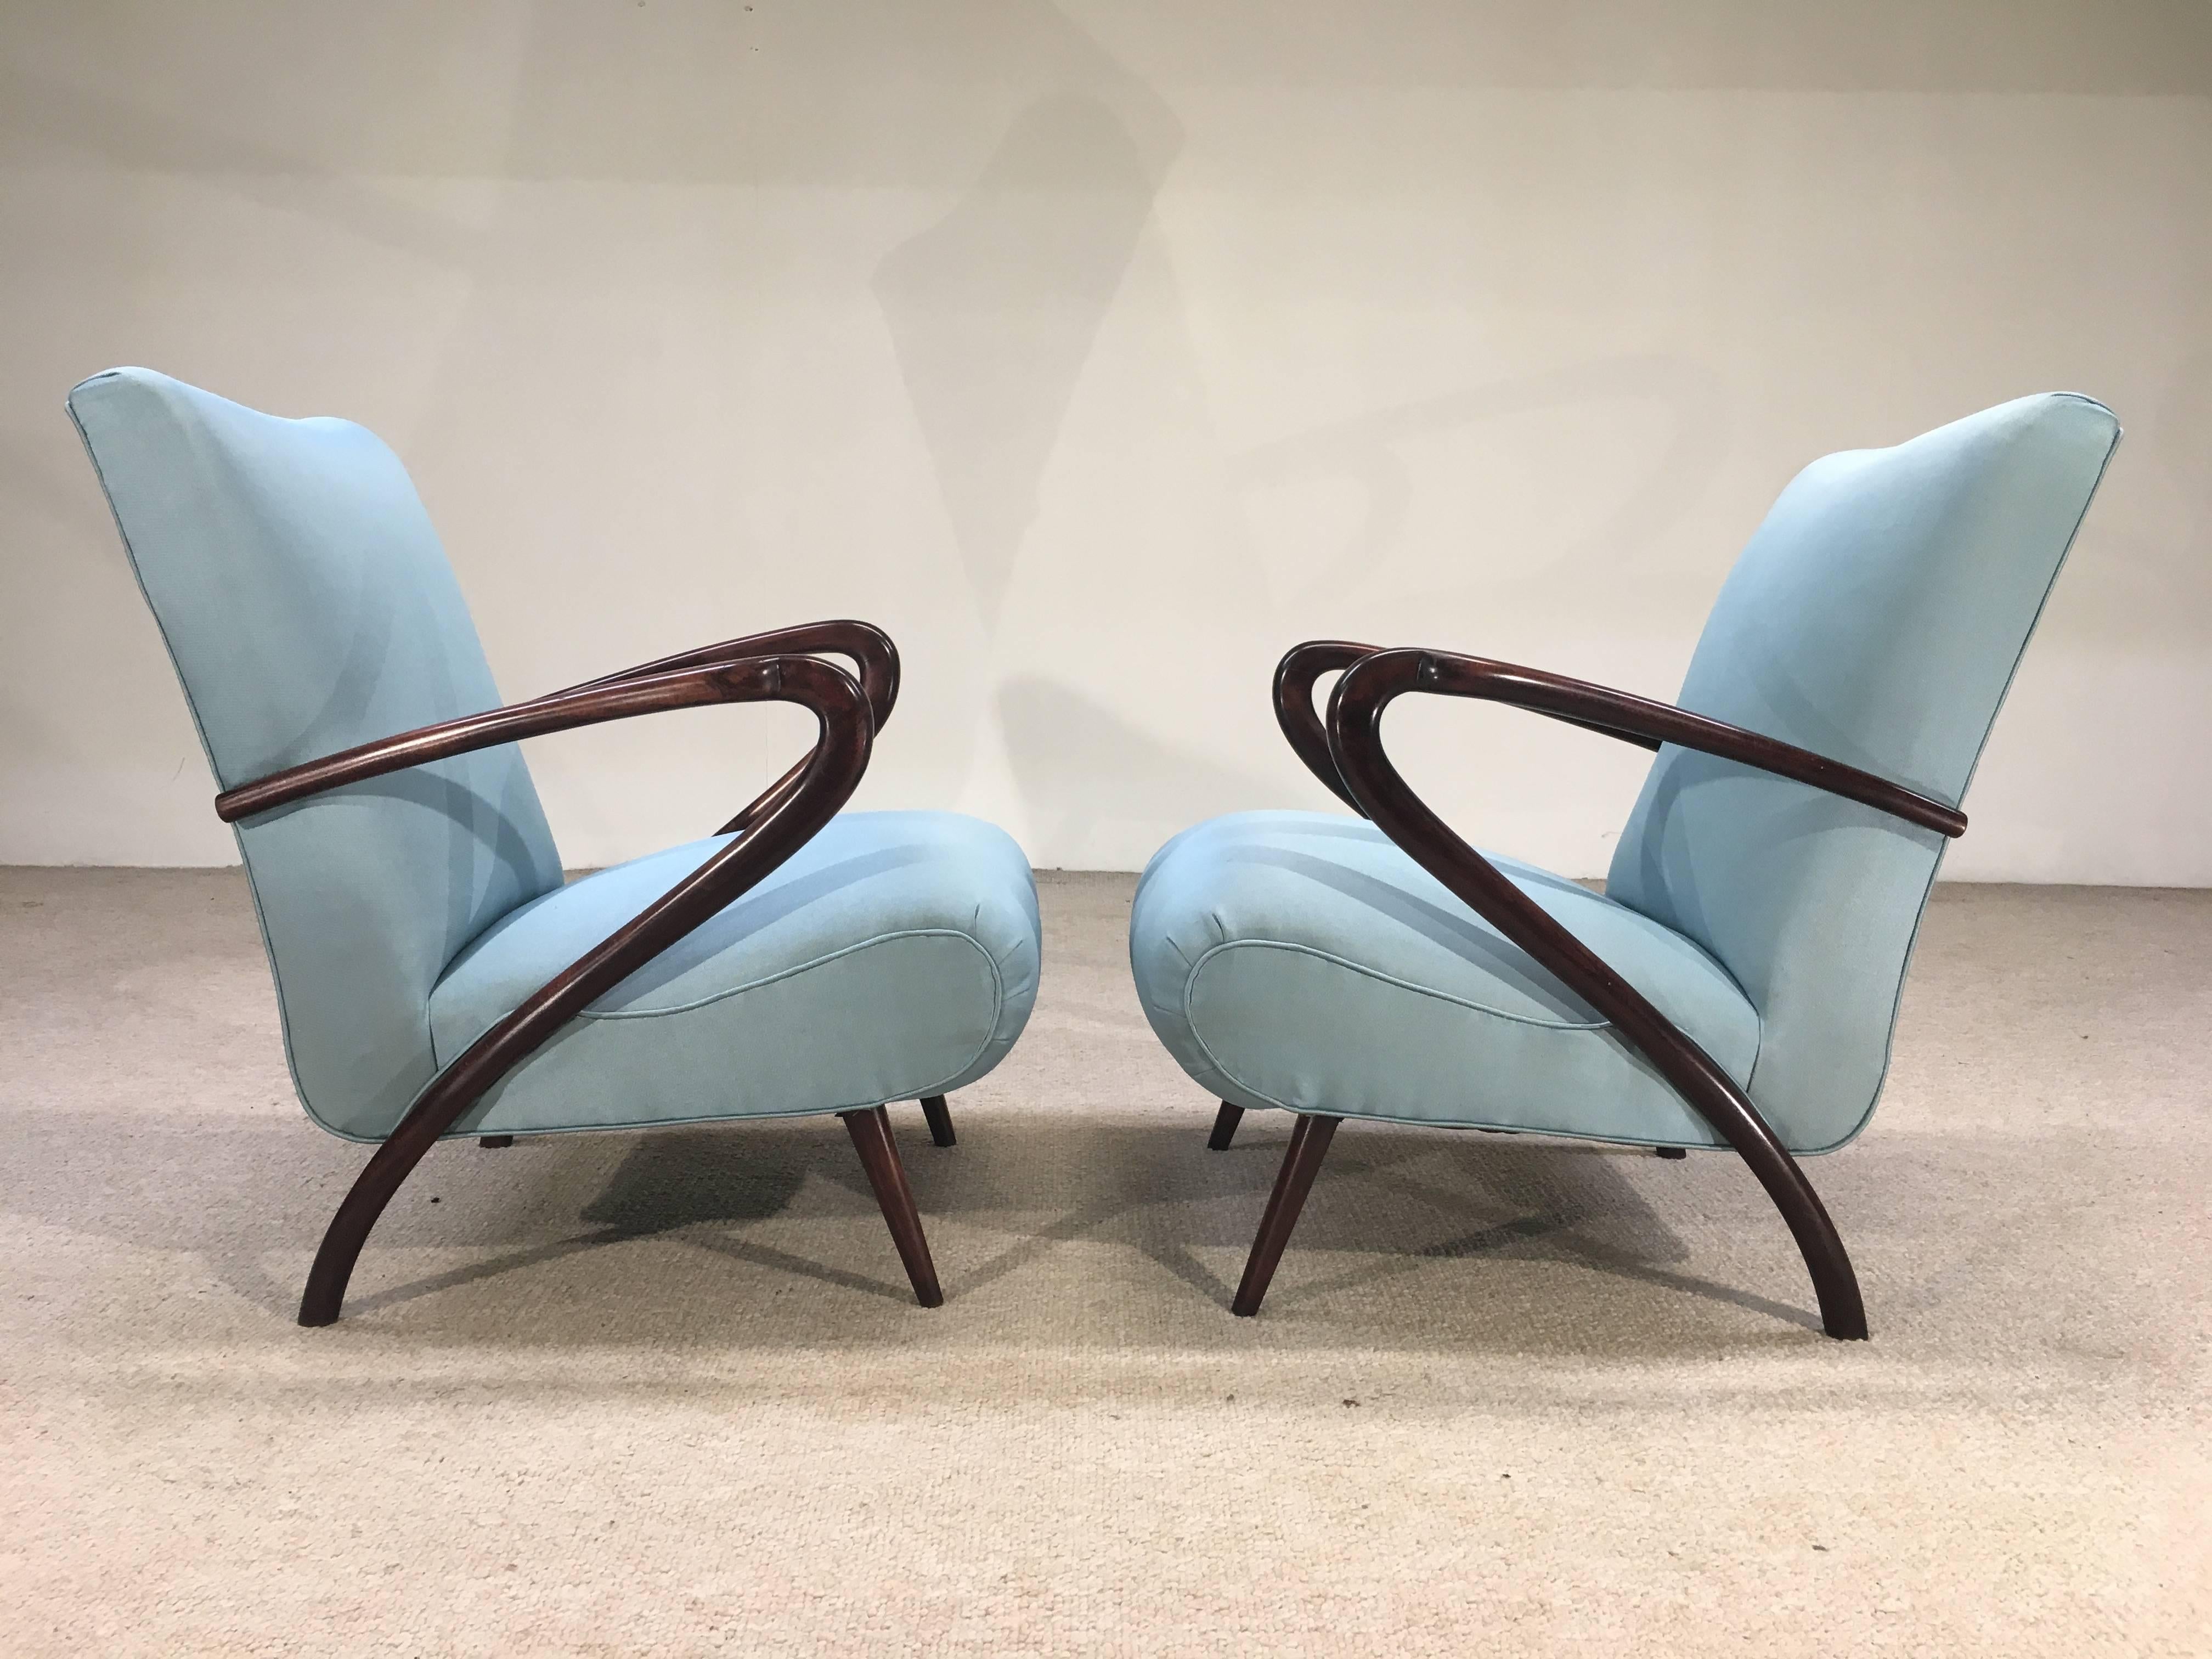 A stunning pair of authentic Paolo Buffa open armchairs having sculptural armrests. Newly upholstered in a soft, silky poly/cotton blend with the springs reset to perfection, Italy, circa 1947
Solid, sturdy, ready for use. 
Seat height 16